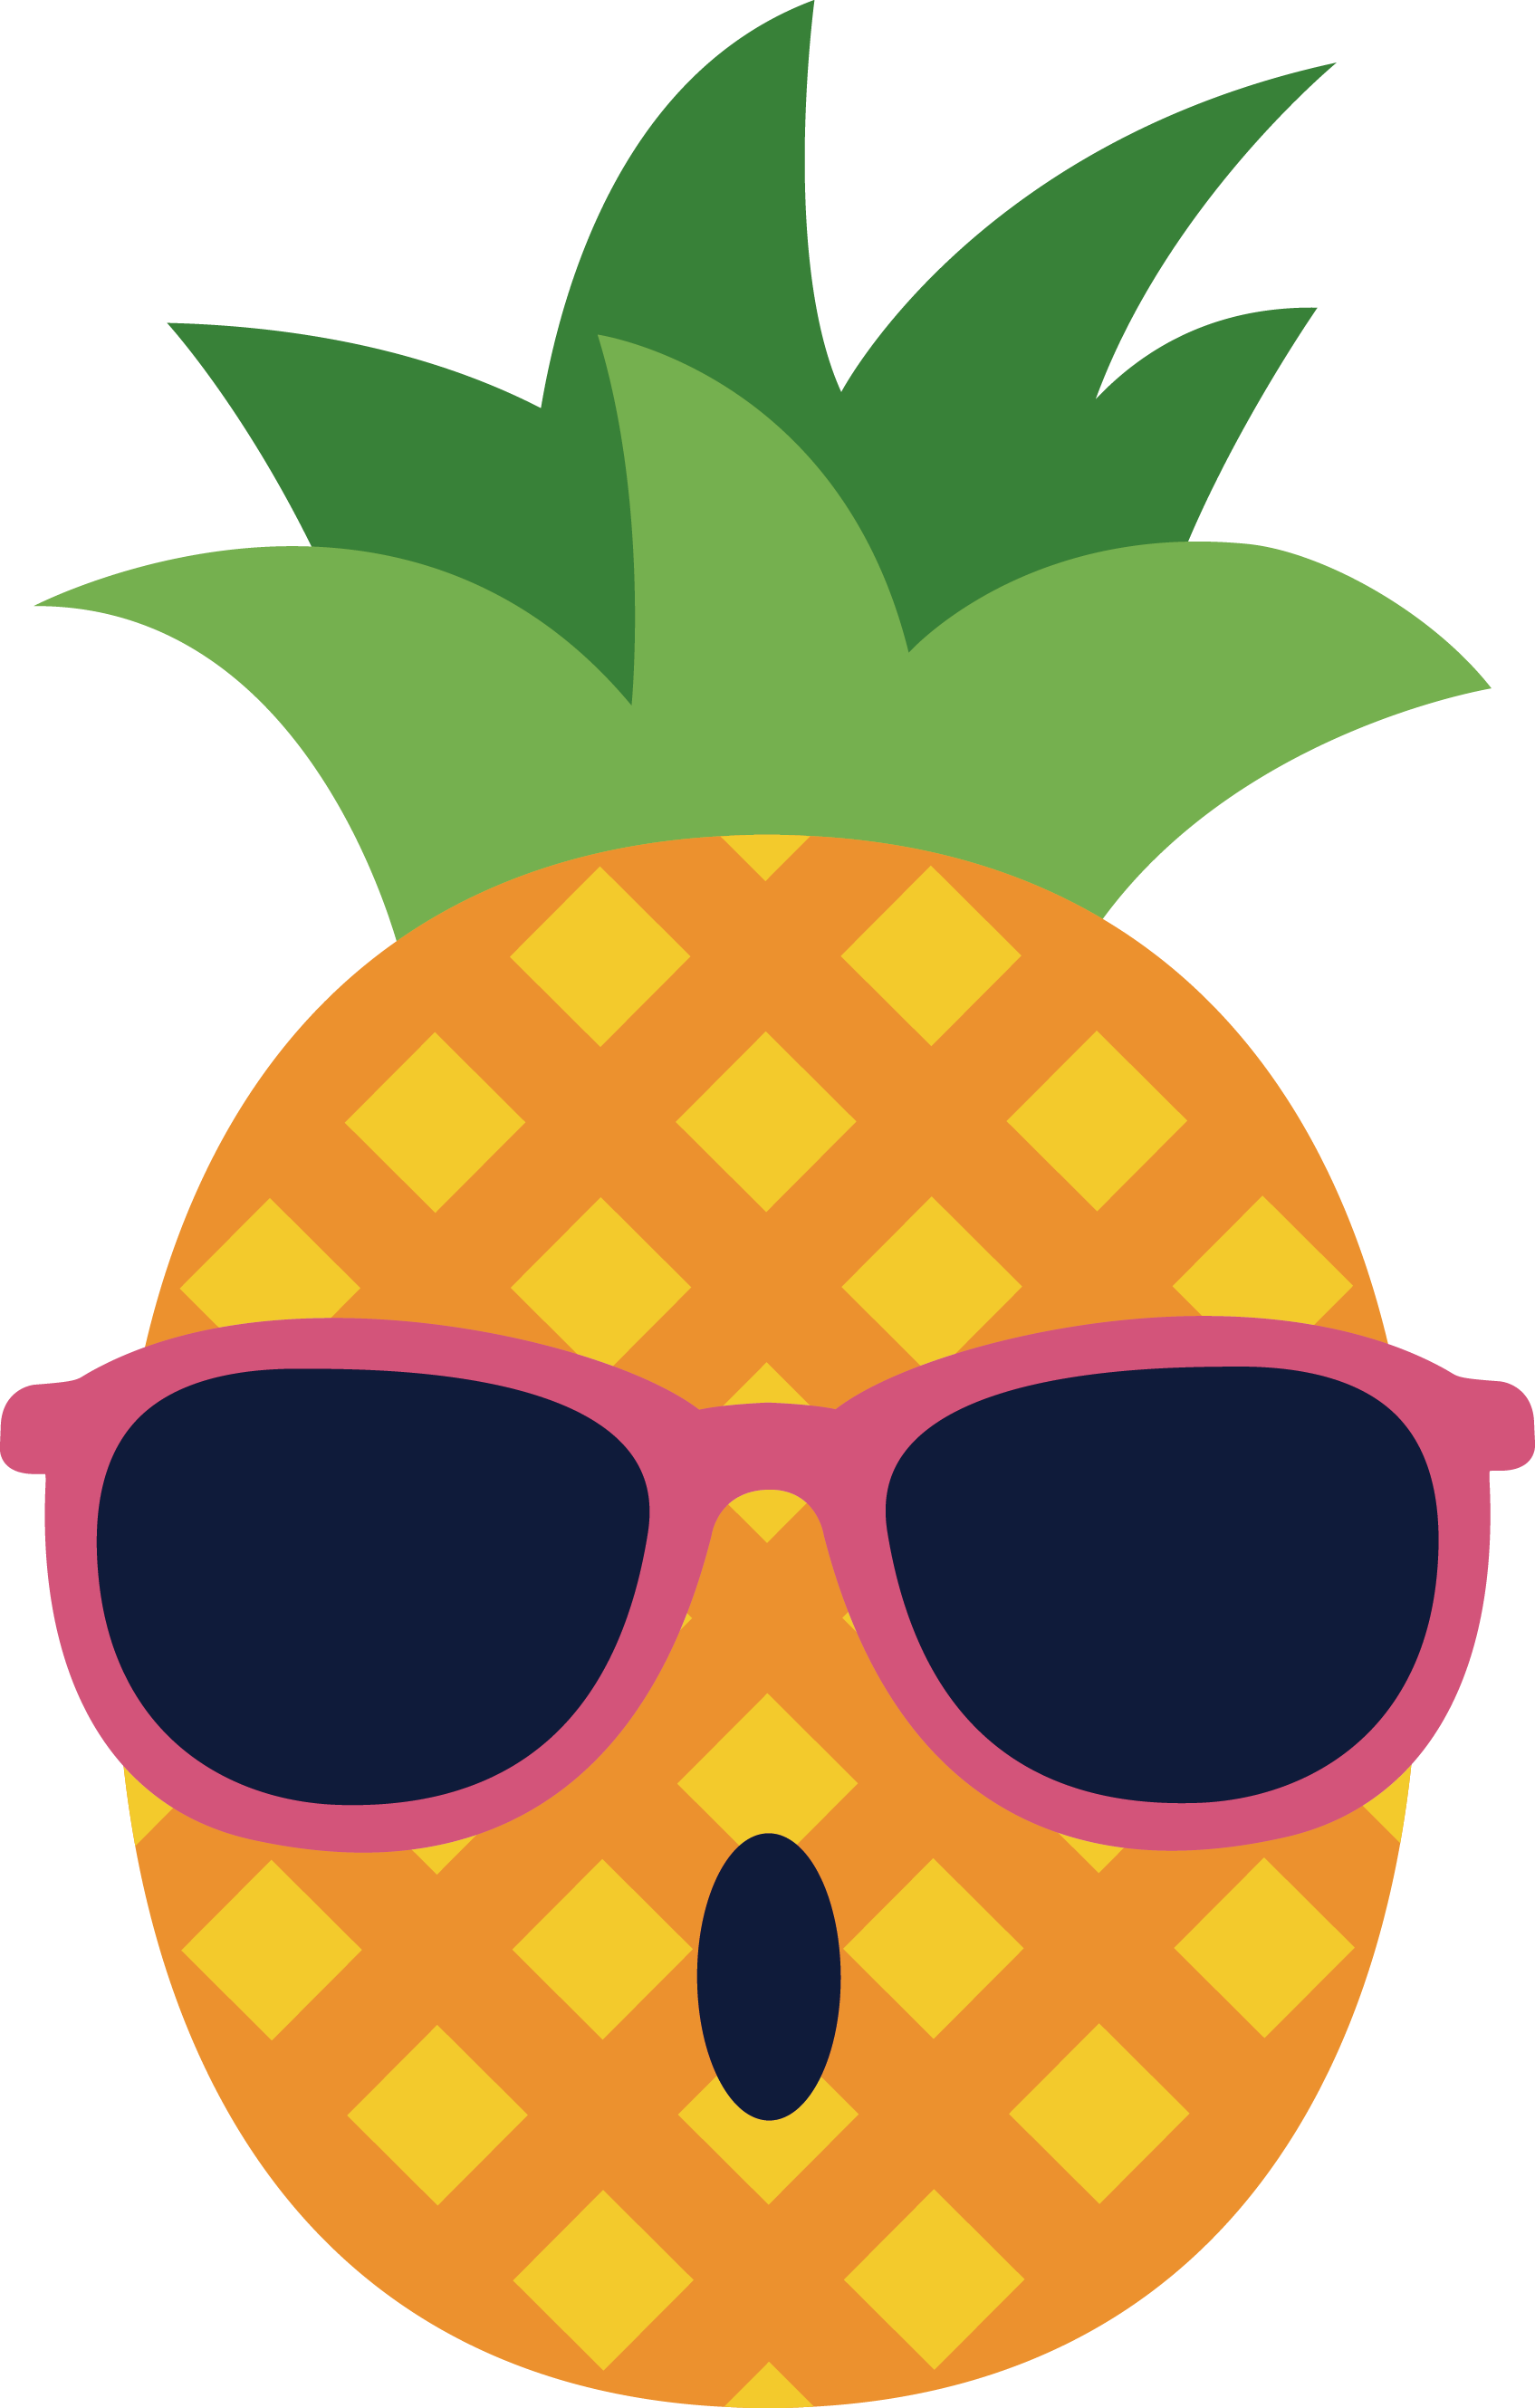 Pineapple Spectacles Glasses - Pineapple With Sunglasses Clipart (1695x2659)